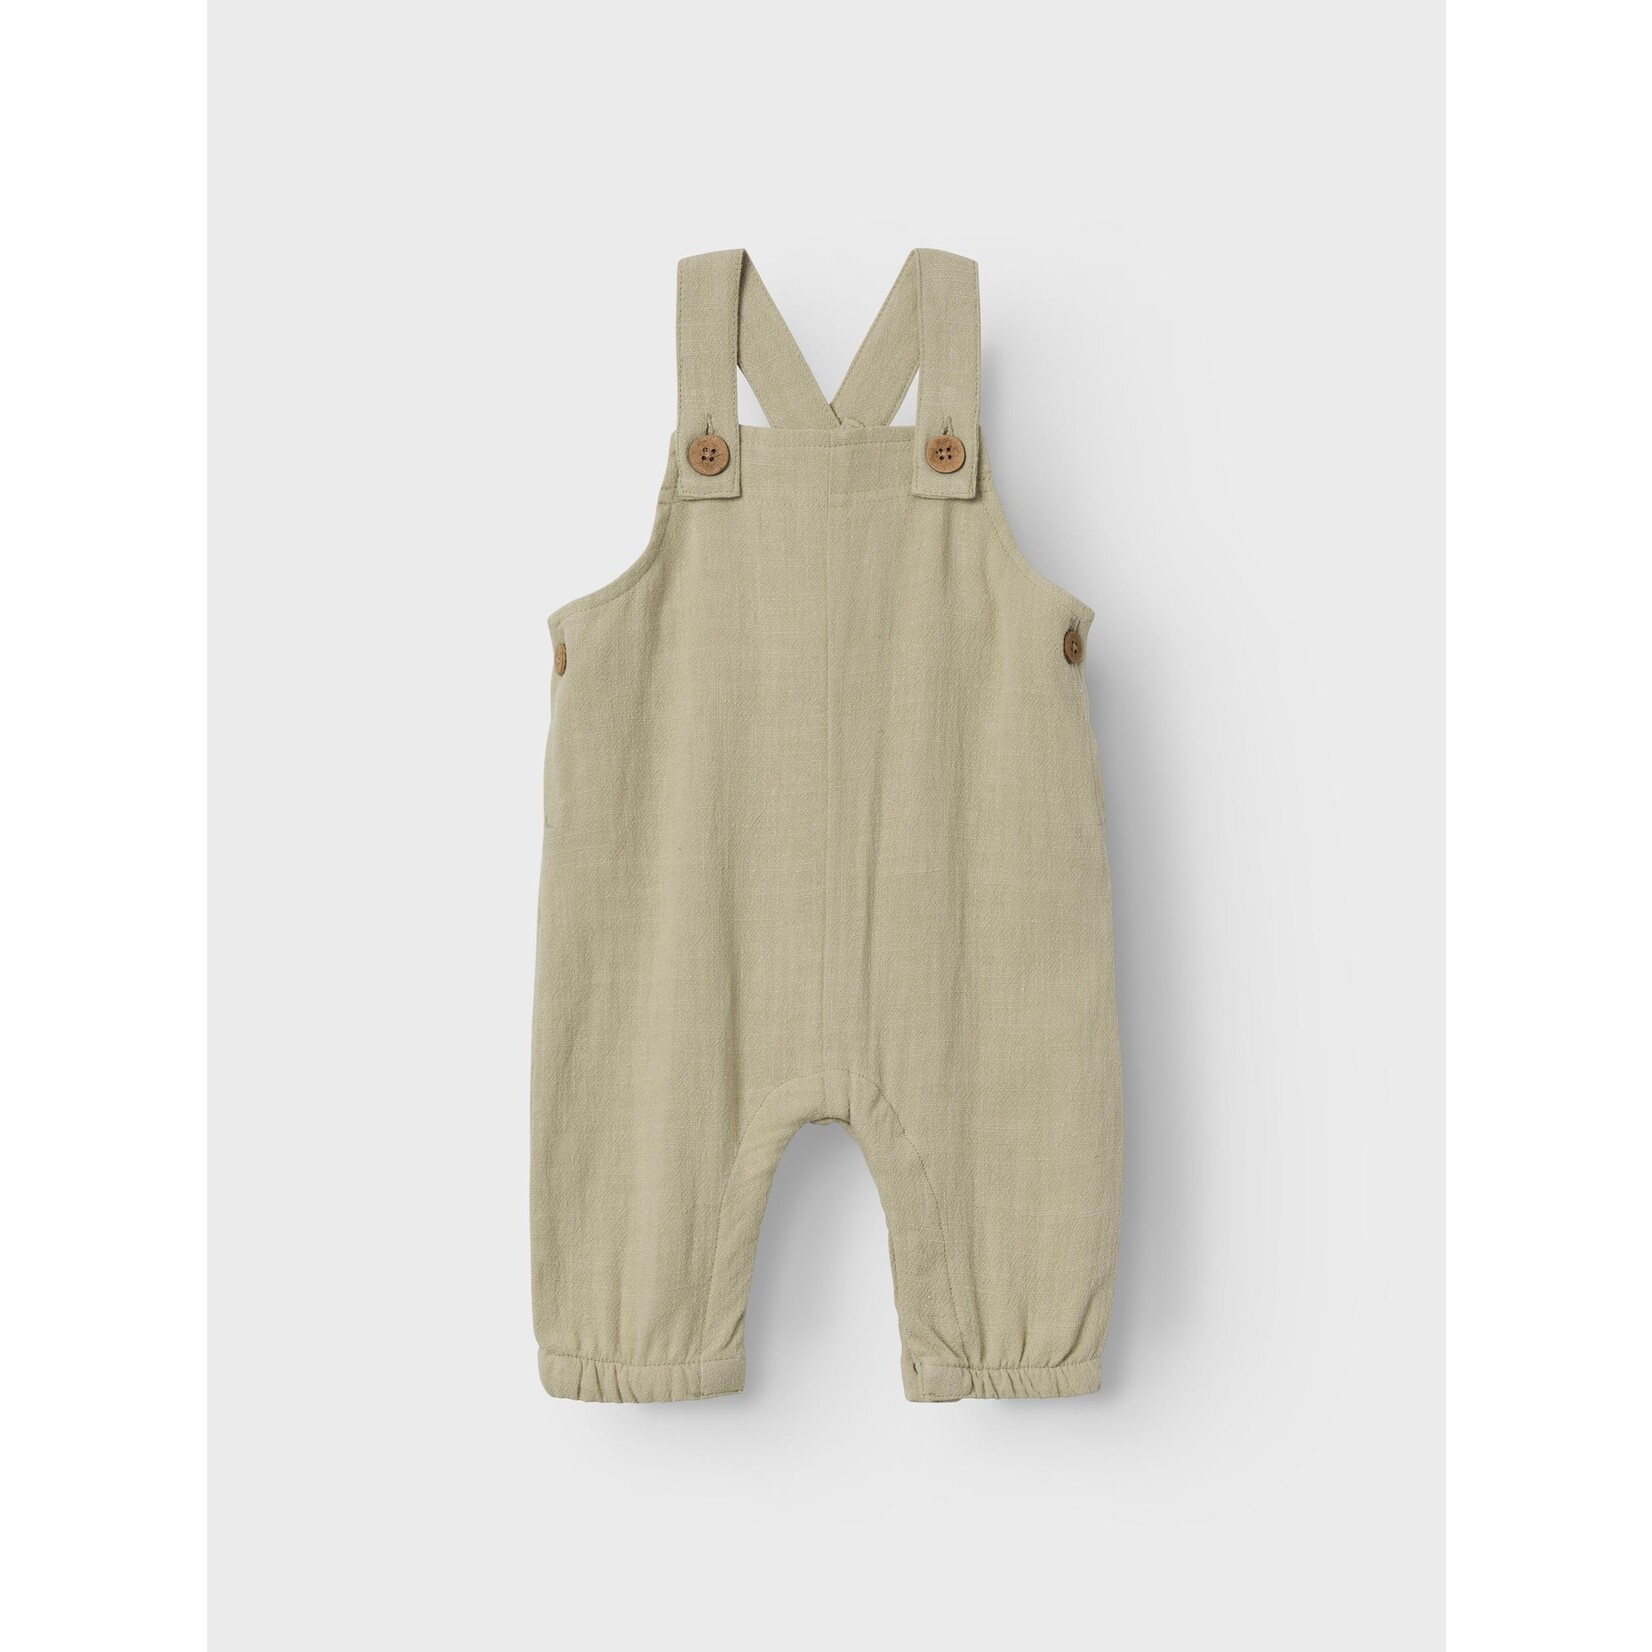 Lil Atelier Lil Atelier - NBMDOLIE FIN LOOSE OVERALL LIL - Moss Gray